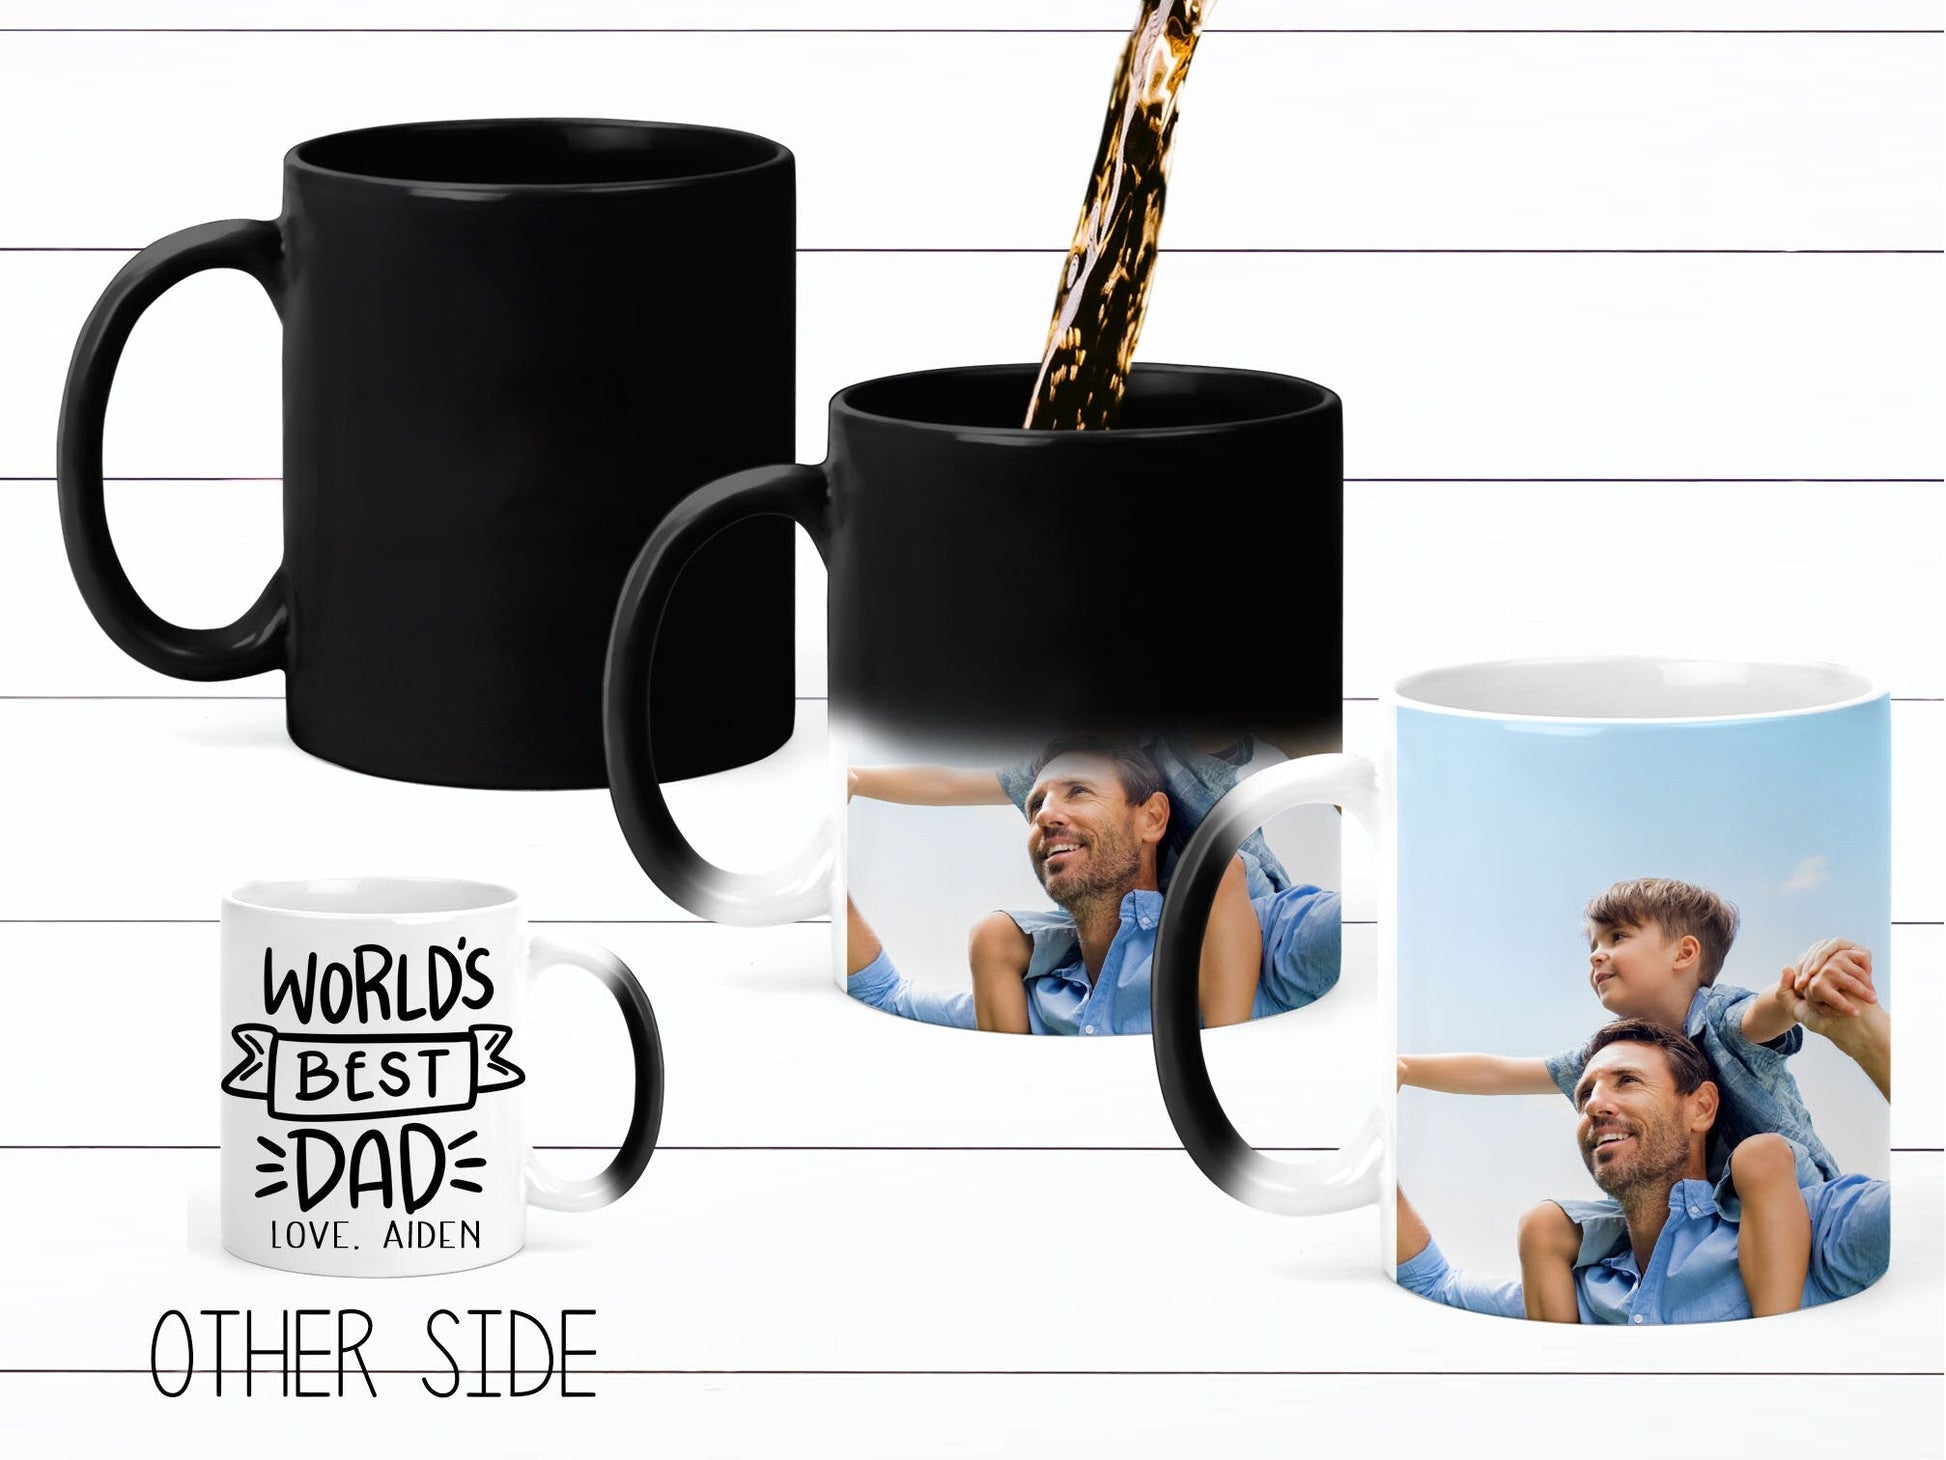 Unique Personalized Gift for Dad from Kids Color Changing Coffee Mug Fathers Day Gift Birthday Gift for Dad Gift Photo Mug World Best Dad - Squishy Cheeks